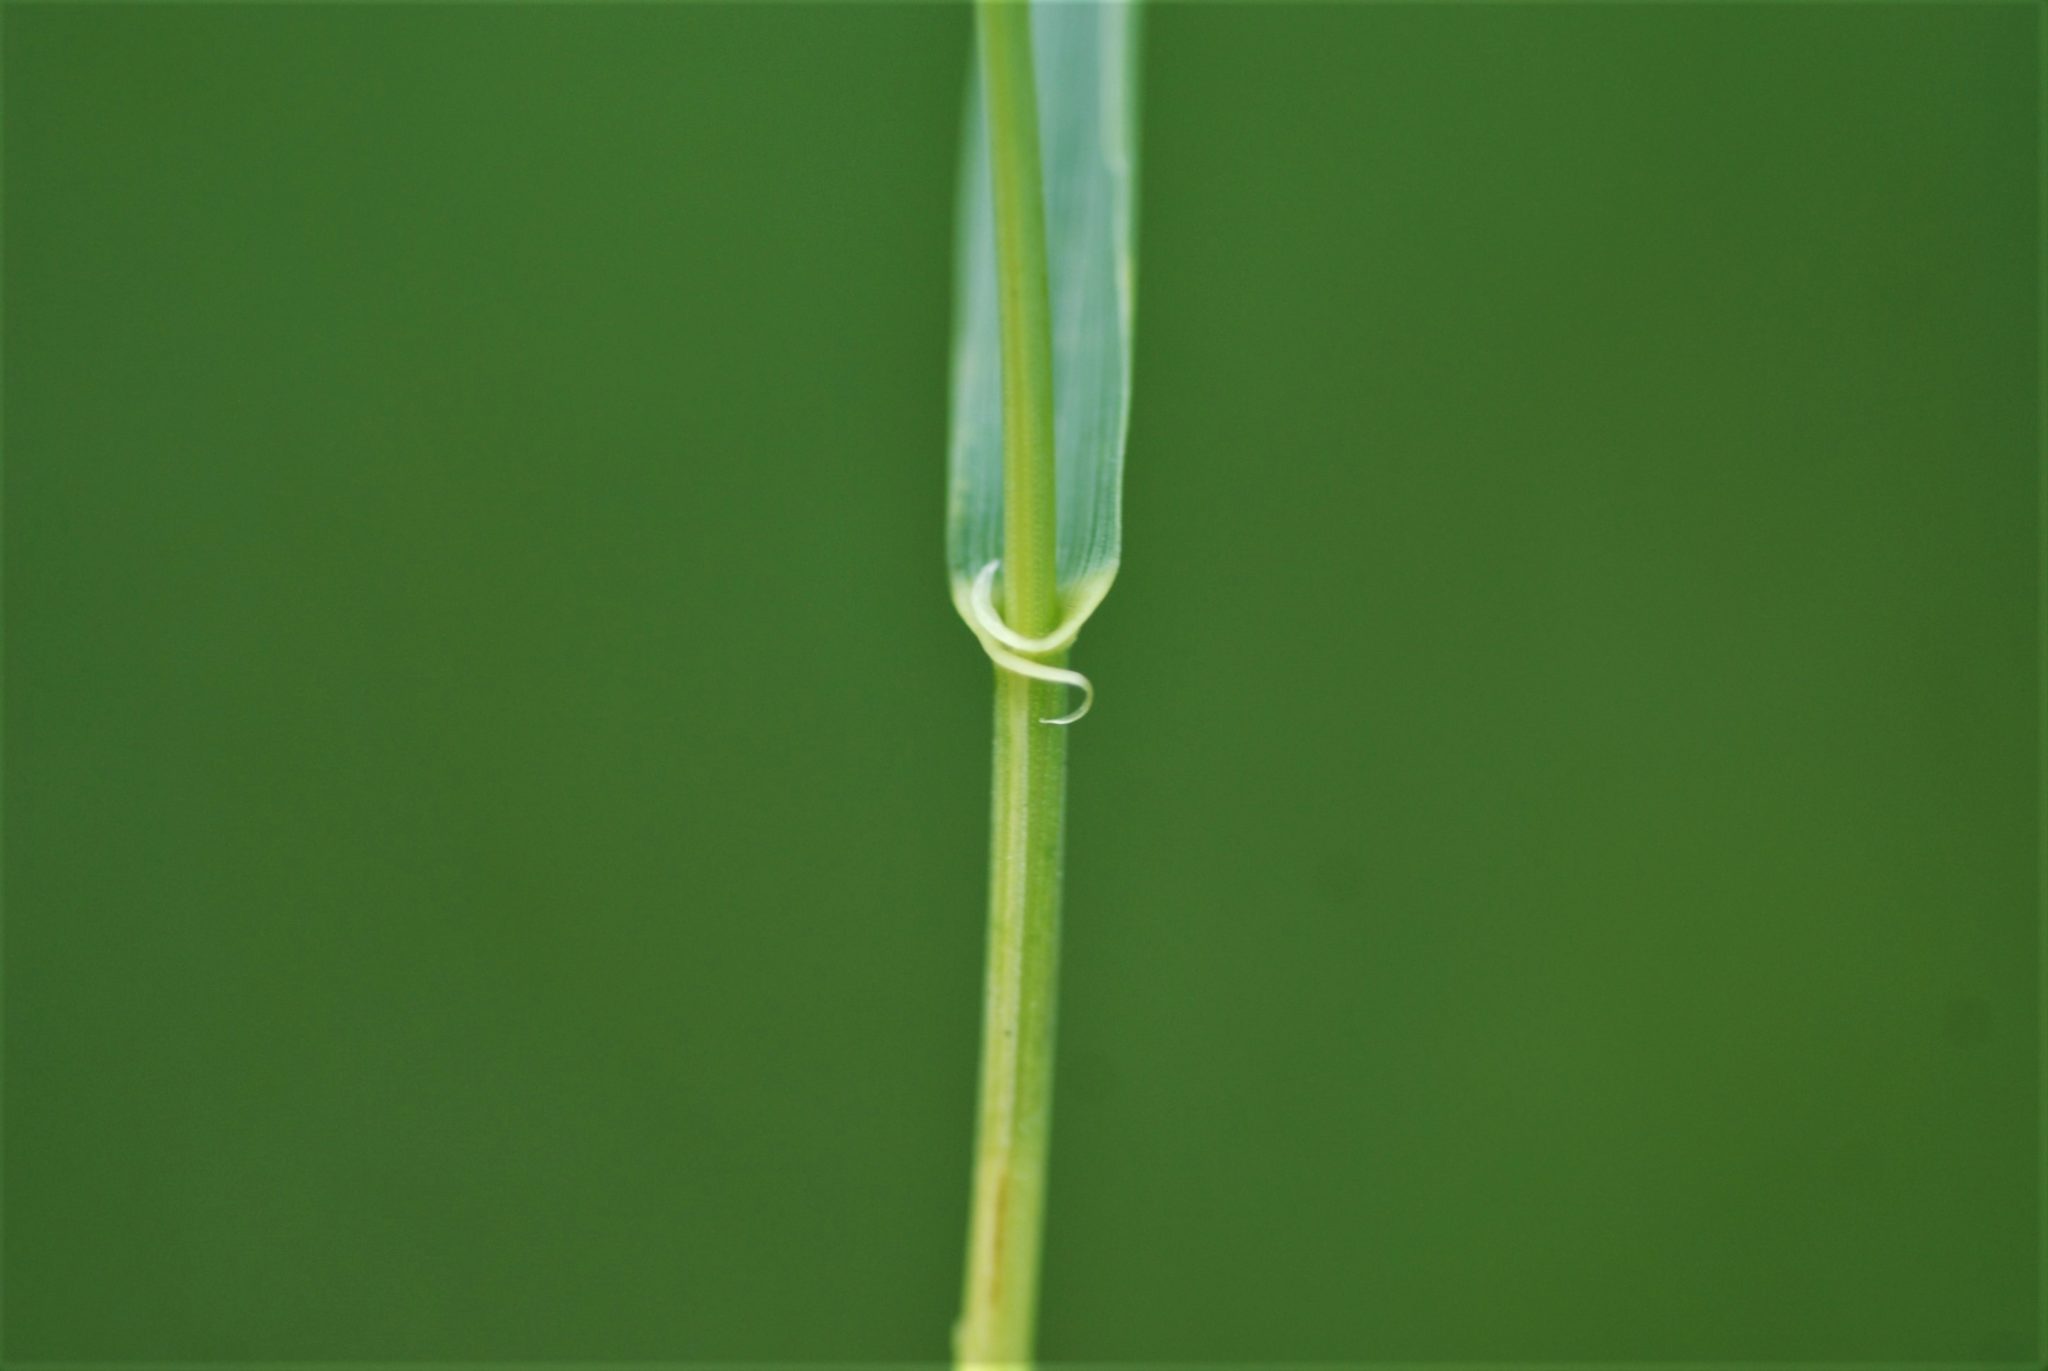 Figure 3. Clasping auricles on quackgrass. (Photo Credit: Dr. Aaron Patton)